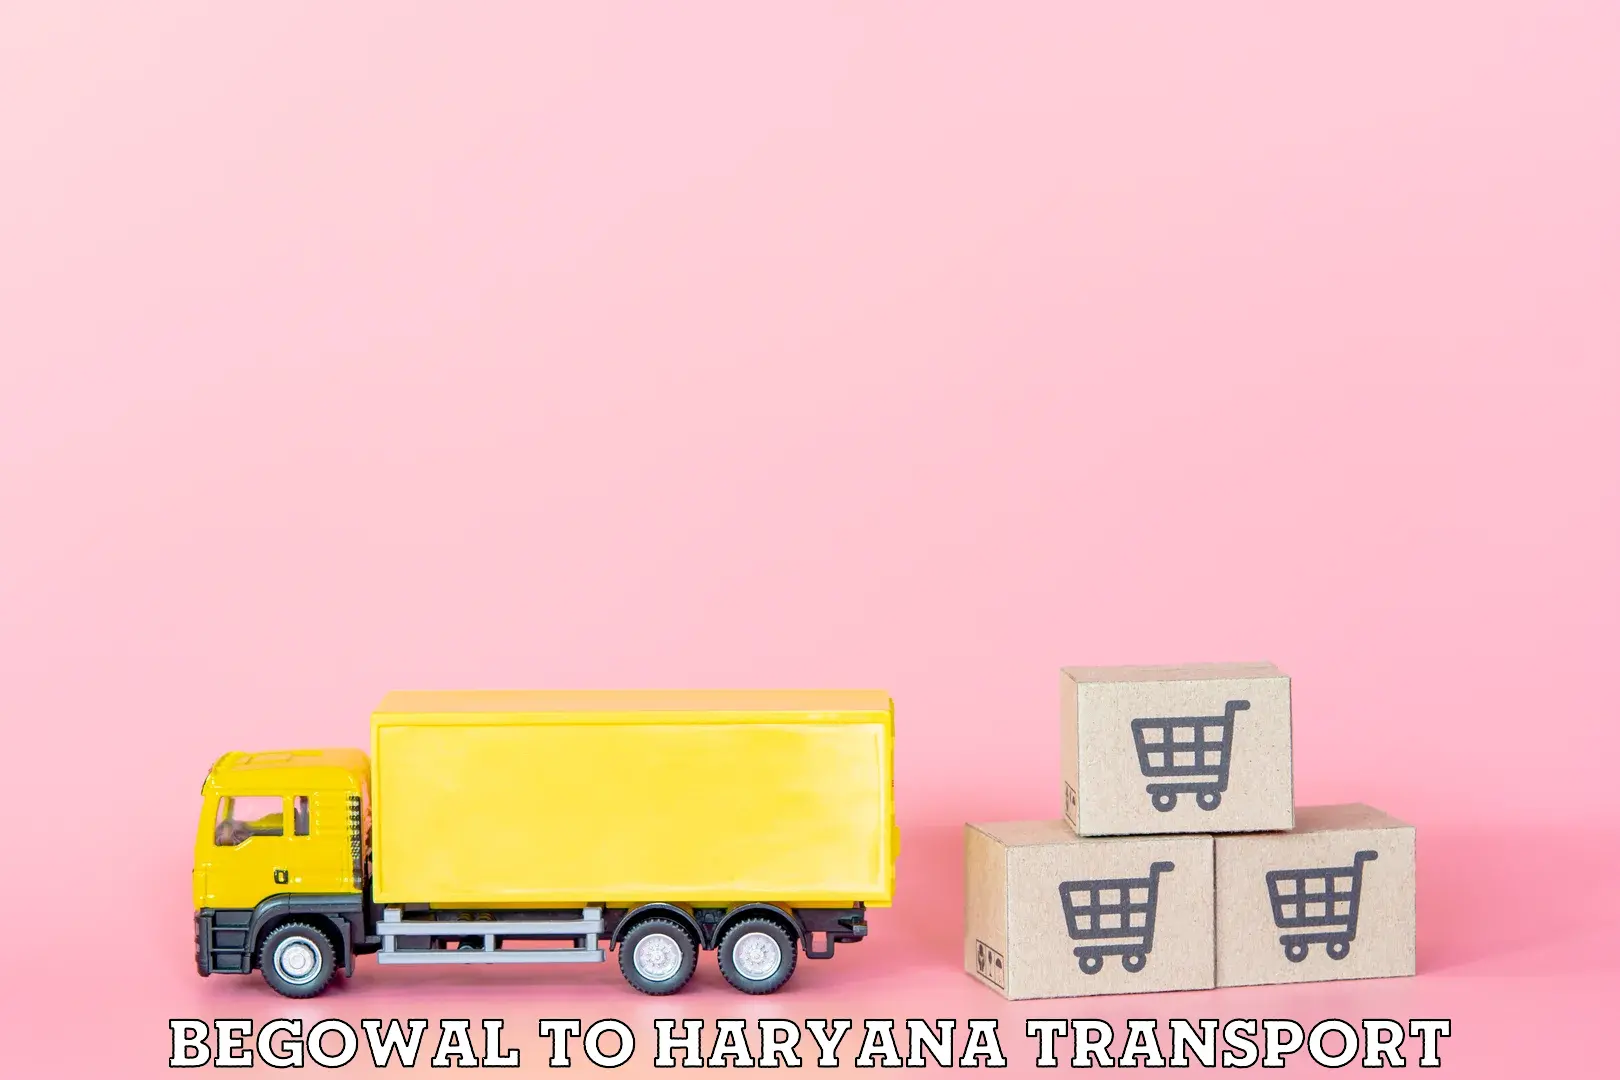 Daily transport service Begowal to Haryana